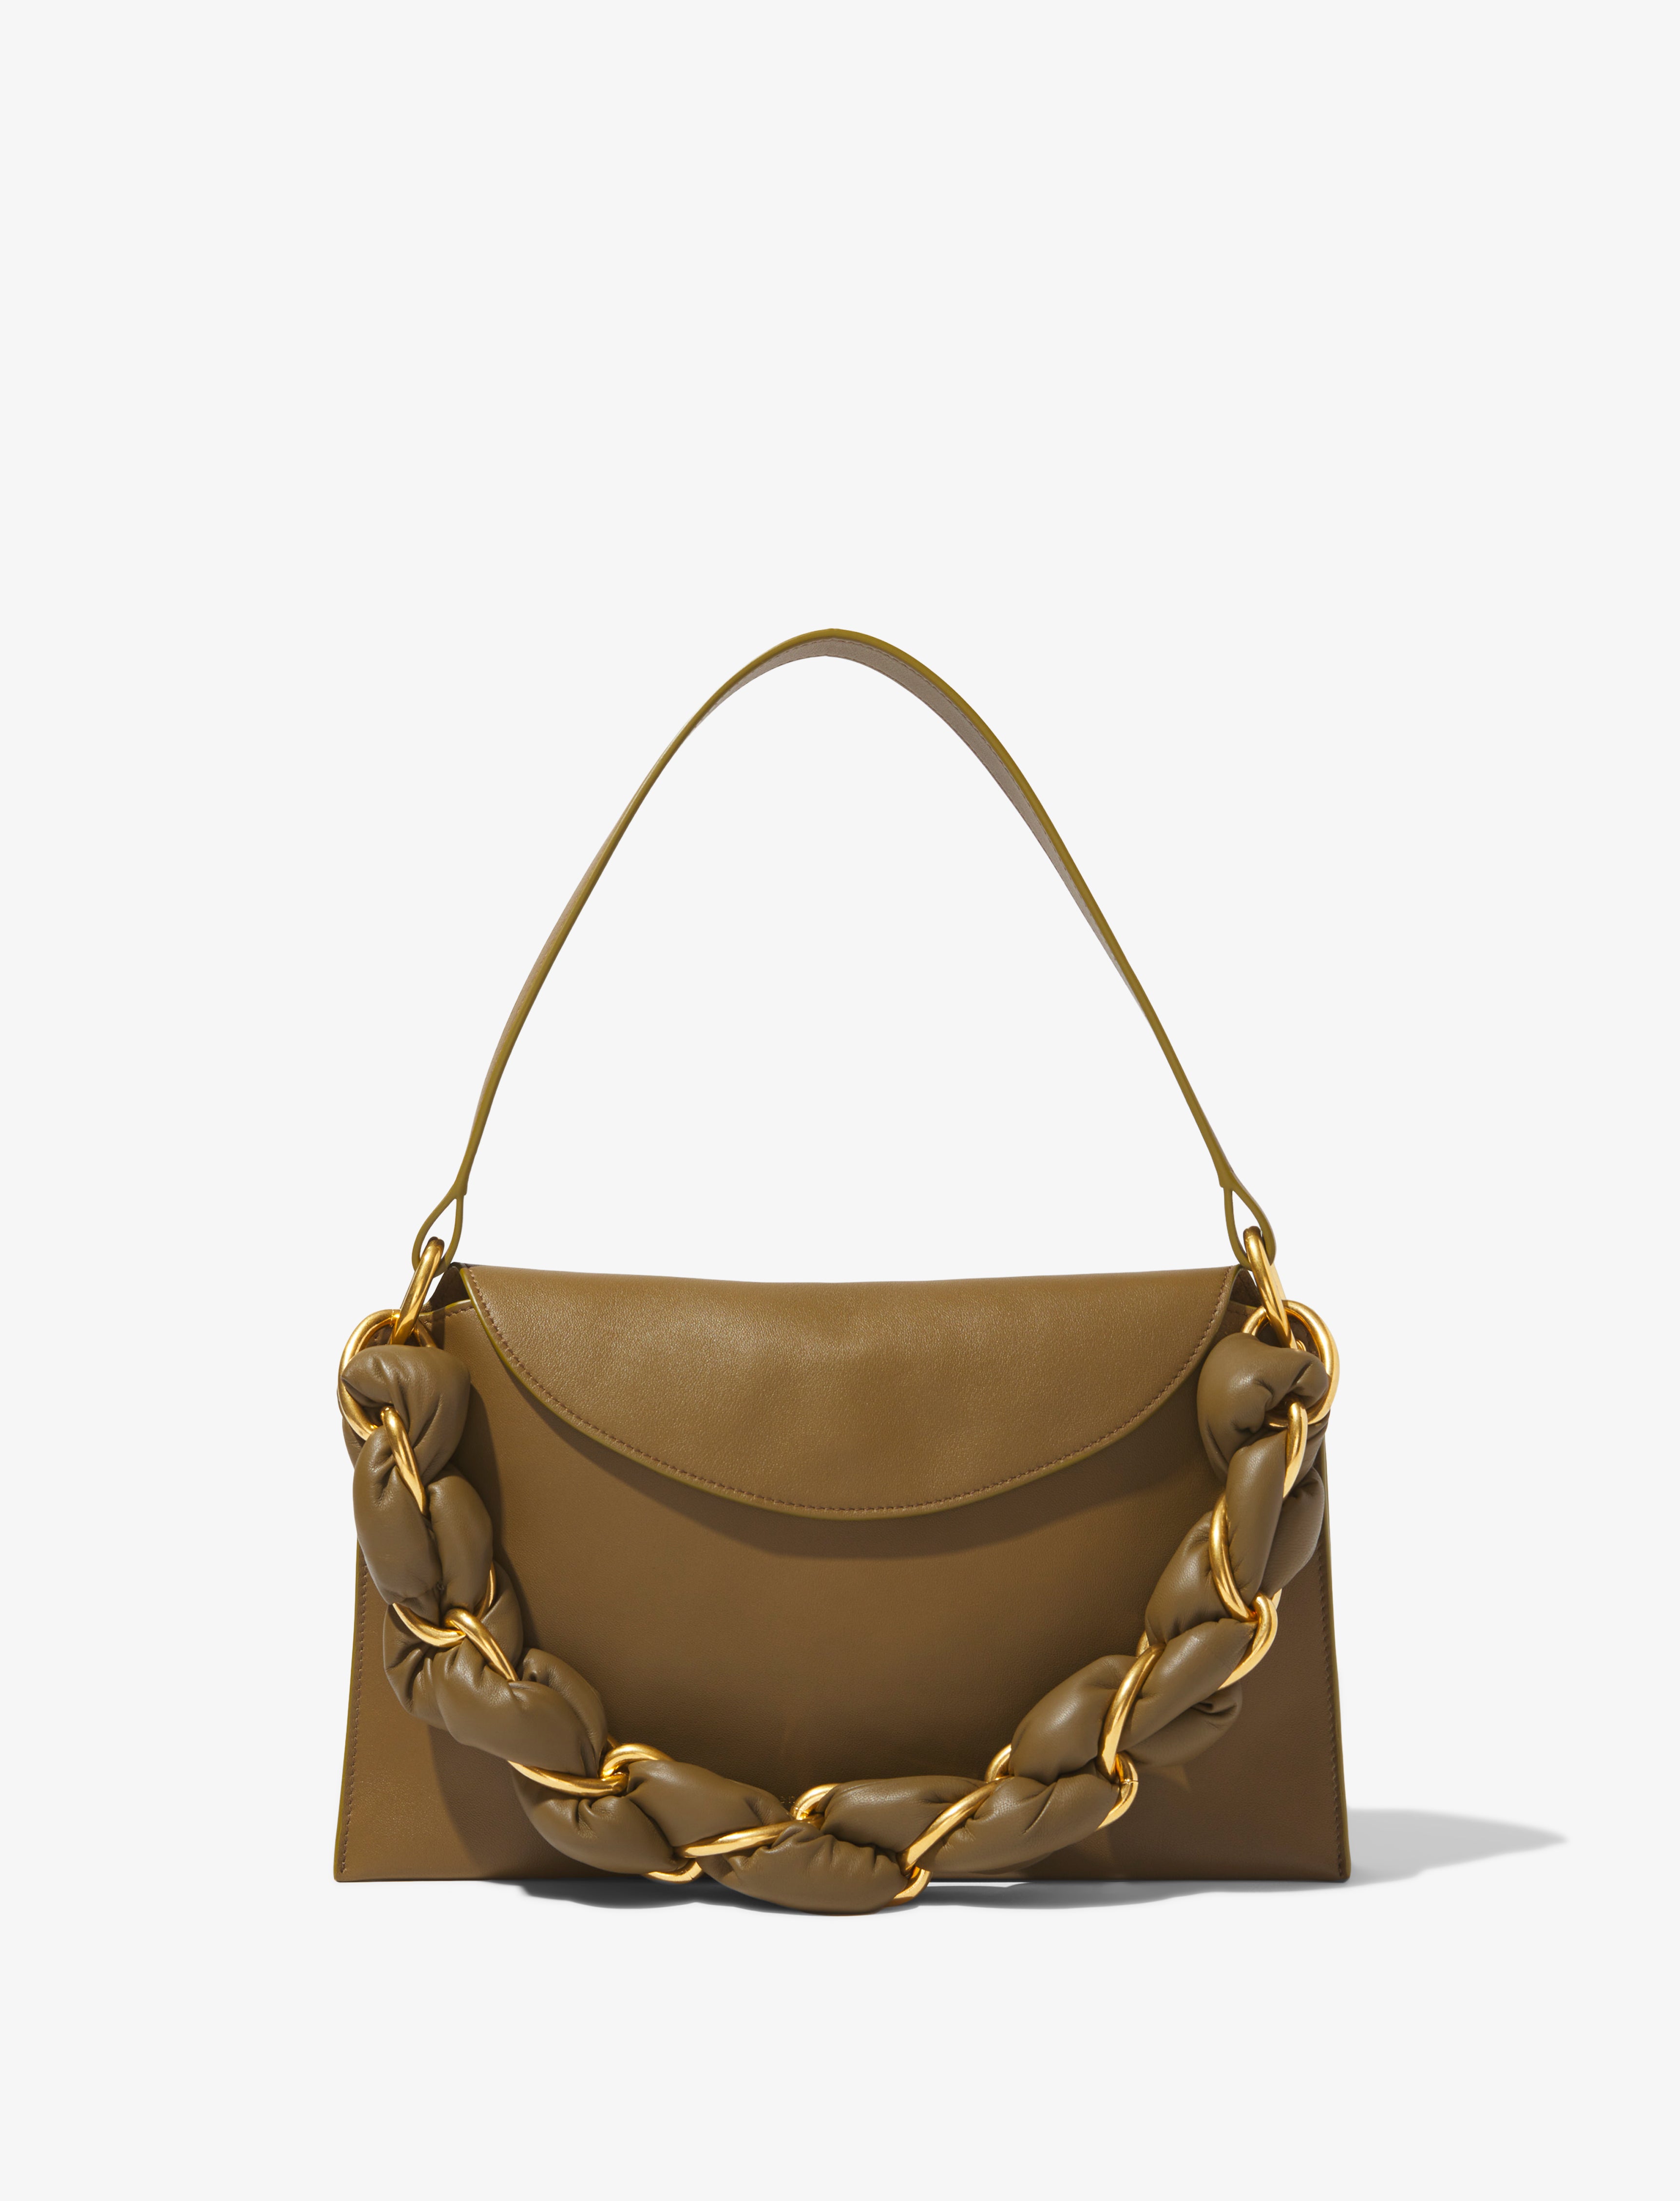 Truffle shoulder bag with gold hardware and chain strap in black